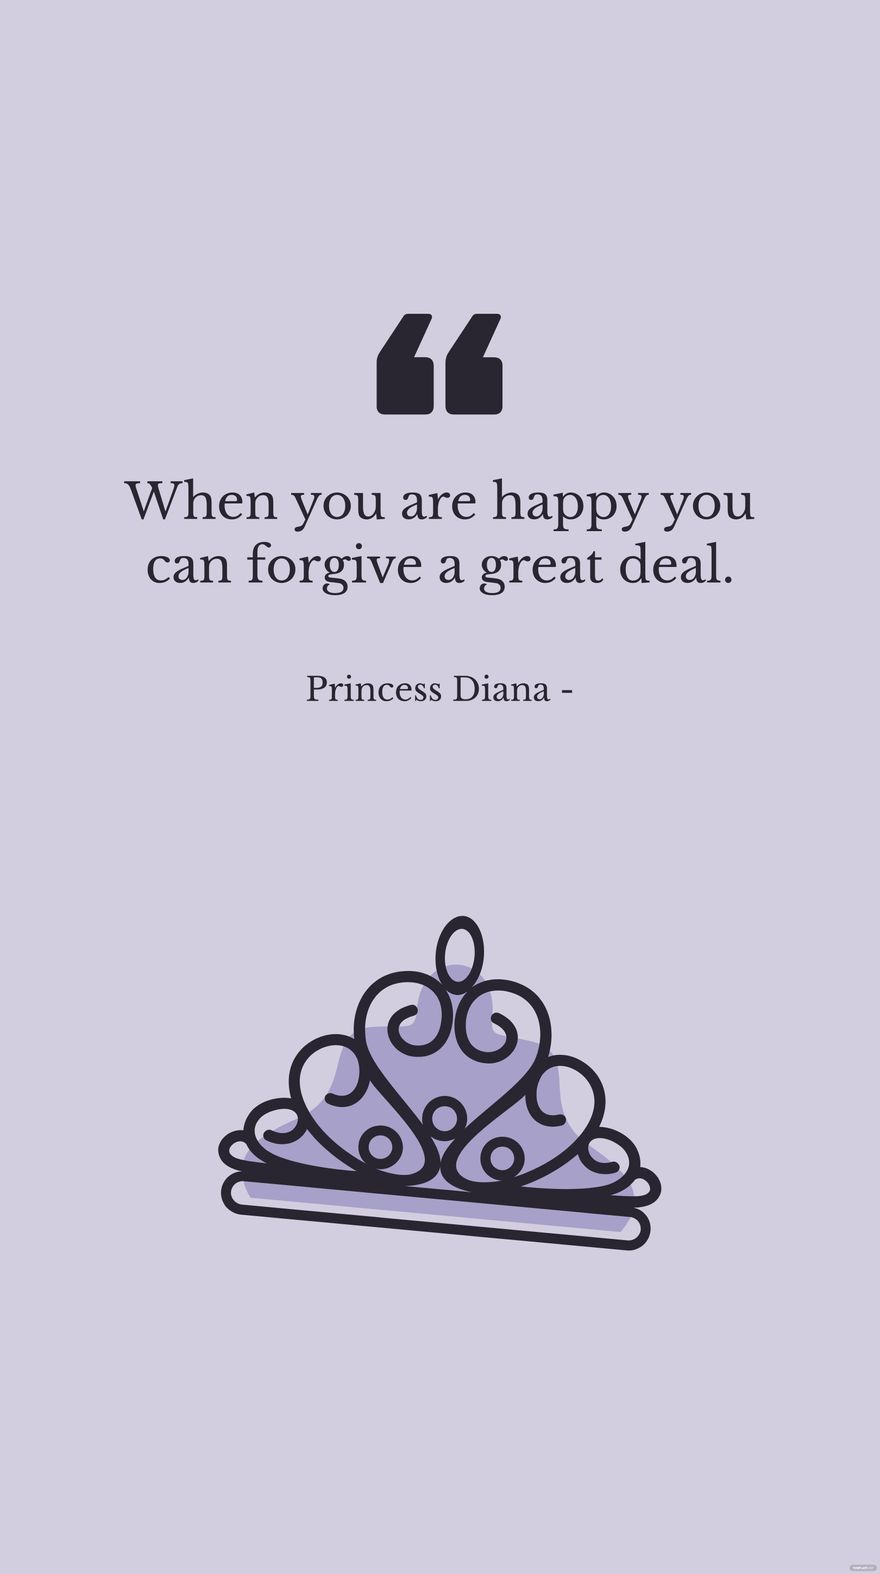 Free Princess Diana - When you are happy you can forgive a great deal. in JPG